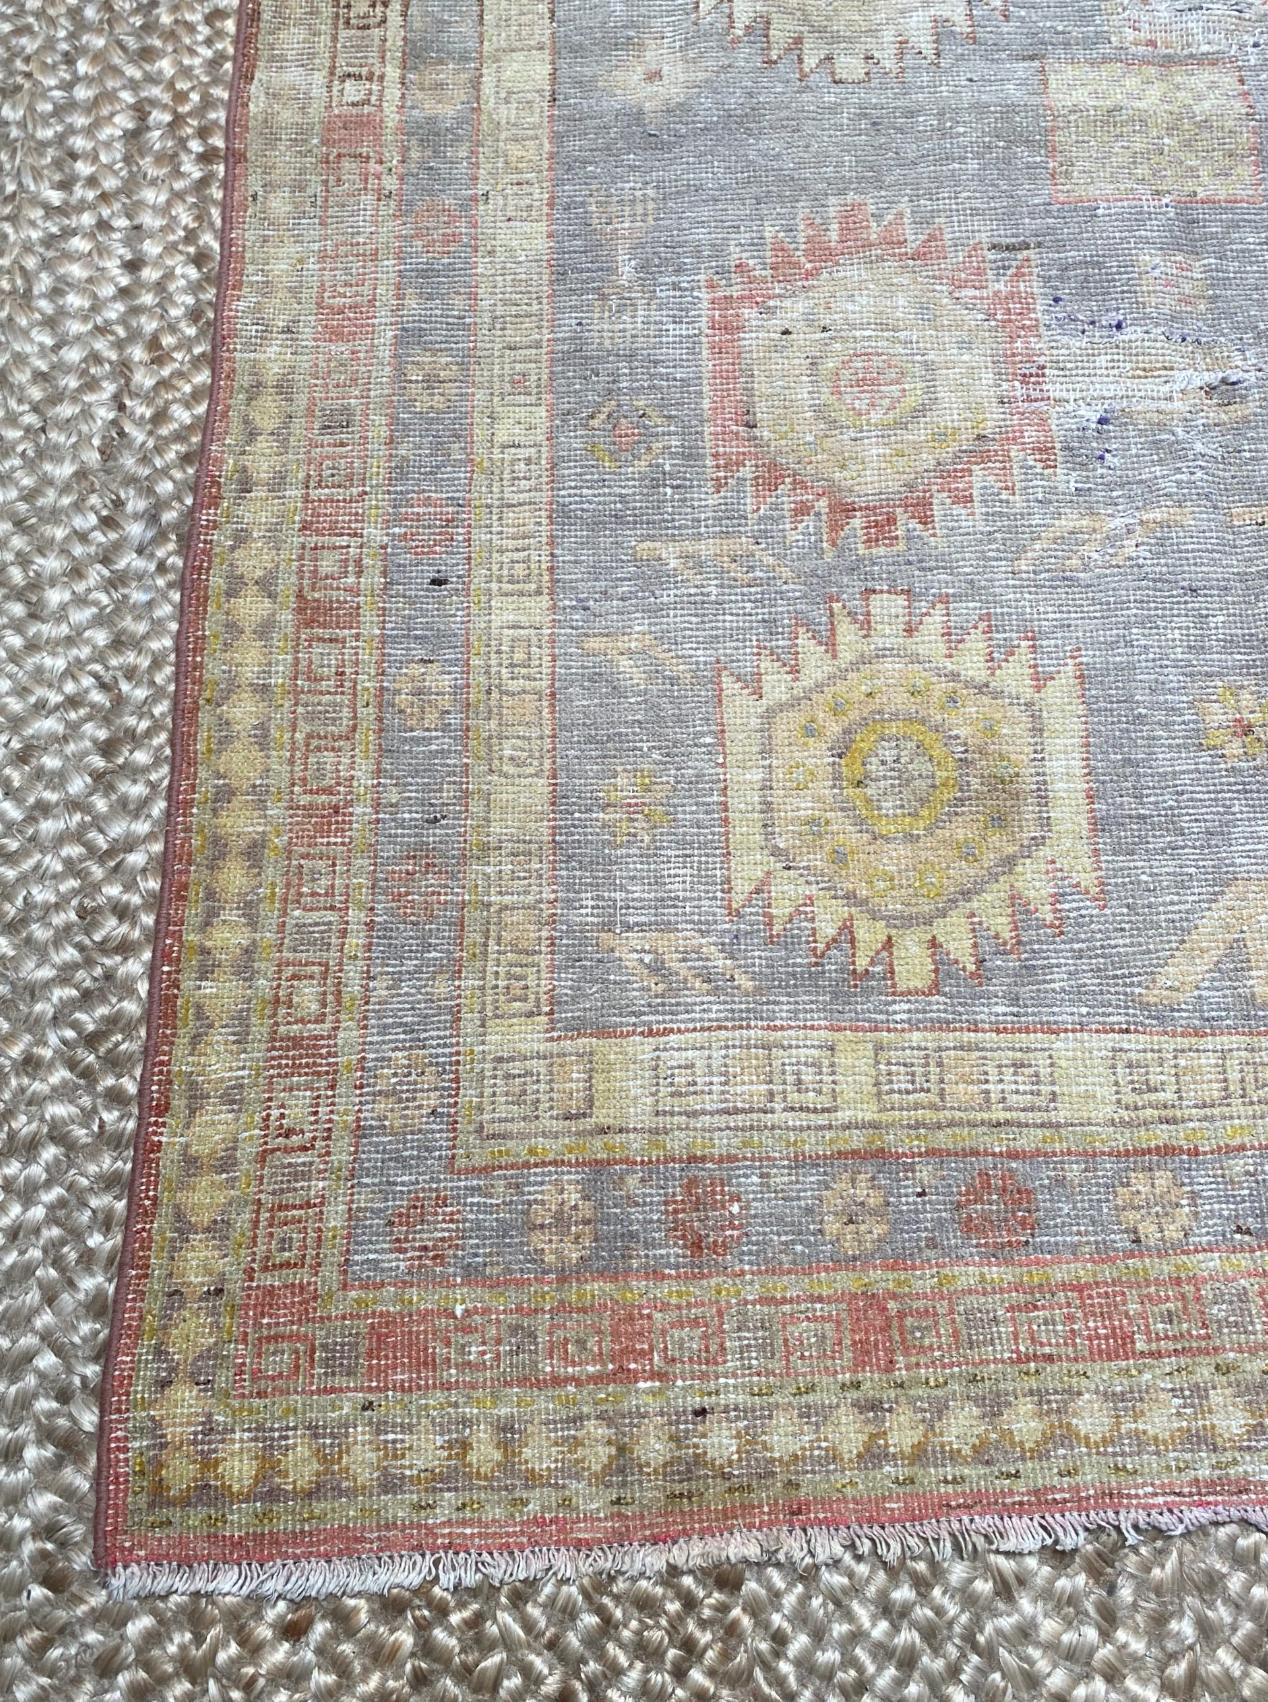 Origin: Mongolia
Dimensions: 8' x 4’2?
Age:1920’s
Design: Khotan
Material: 100% Wool-pile
Color: Sky Blue, Rust, Beige, Gold

3284

An epitome of history, character and culture, Antique Khotan rugs add richness to a room. Produced in